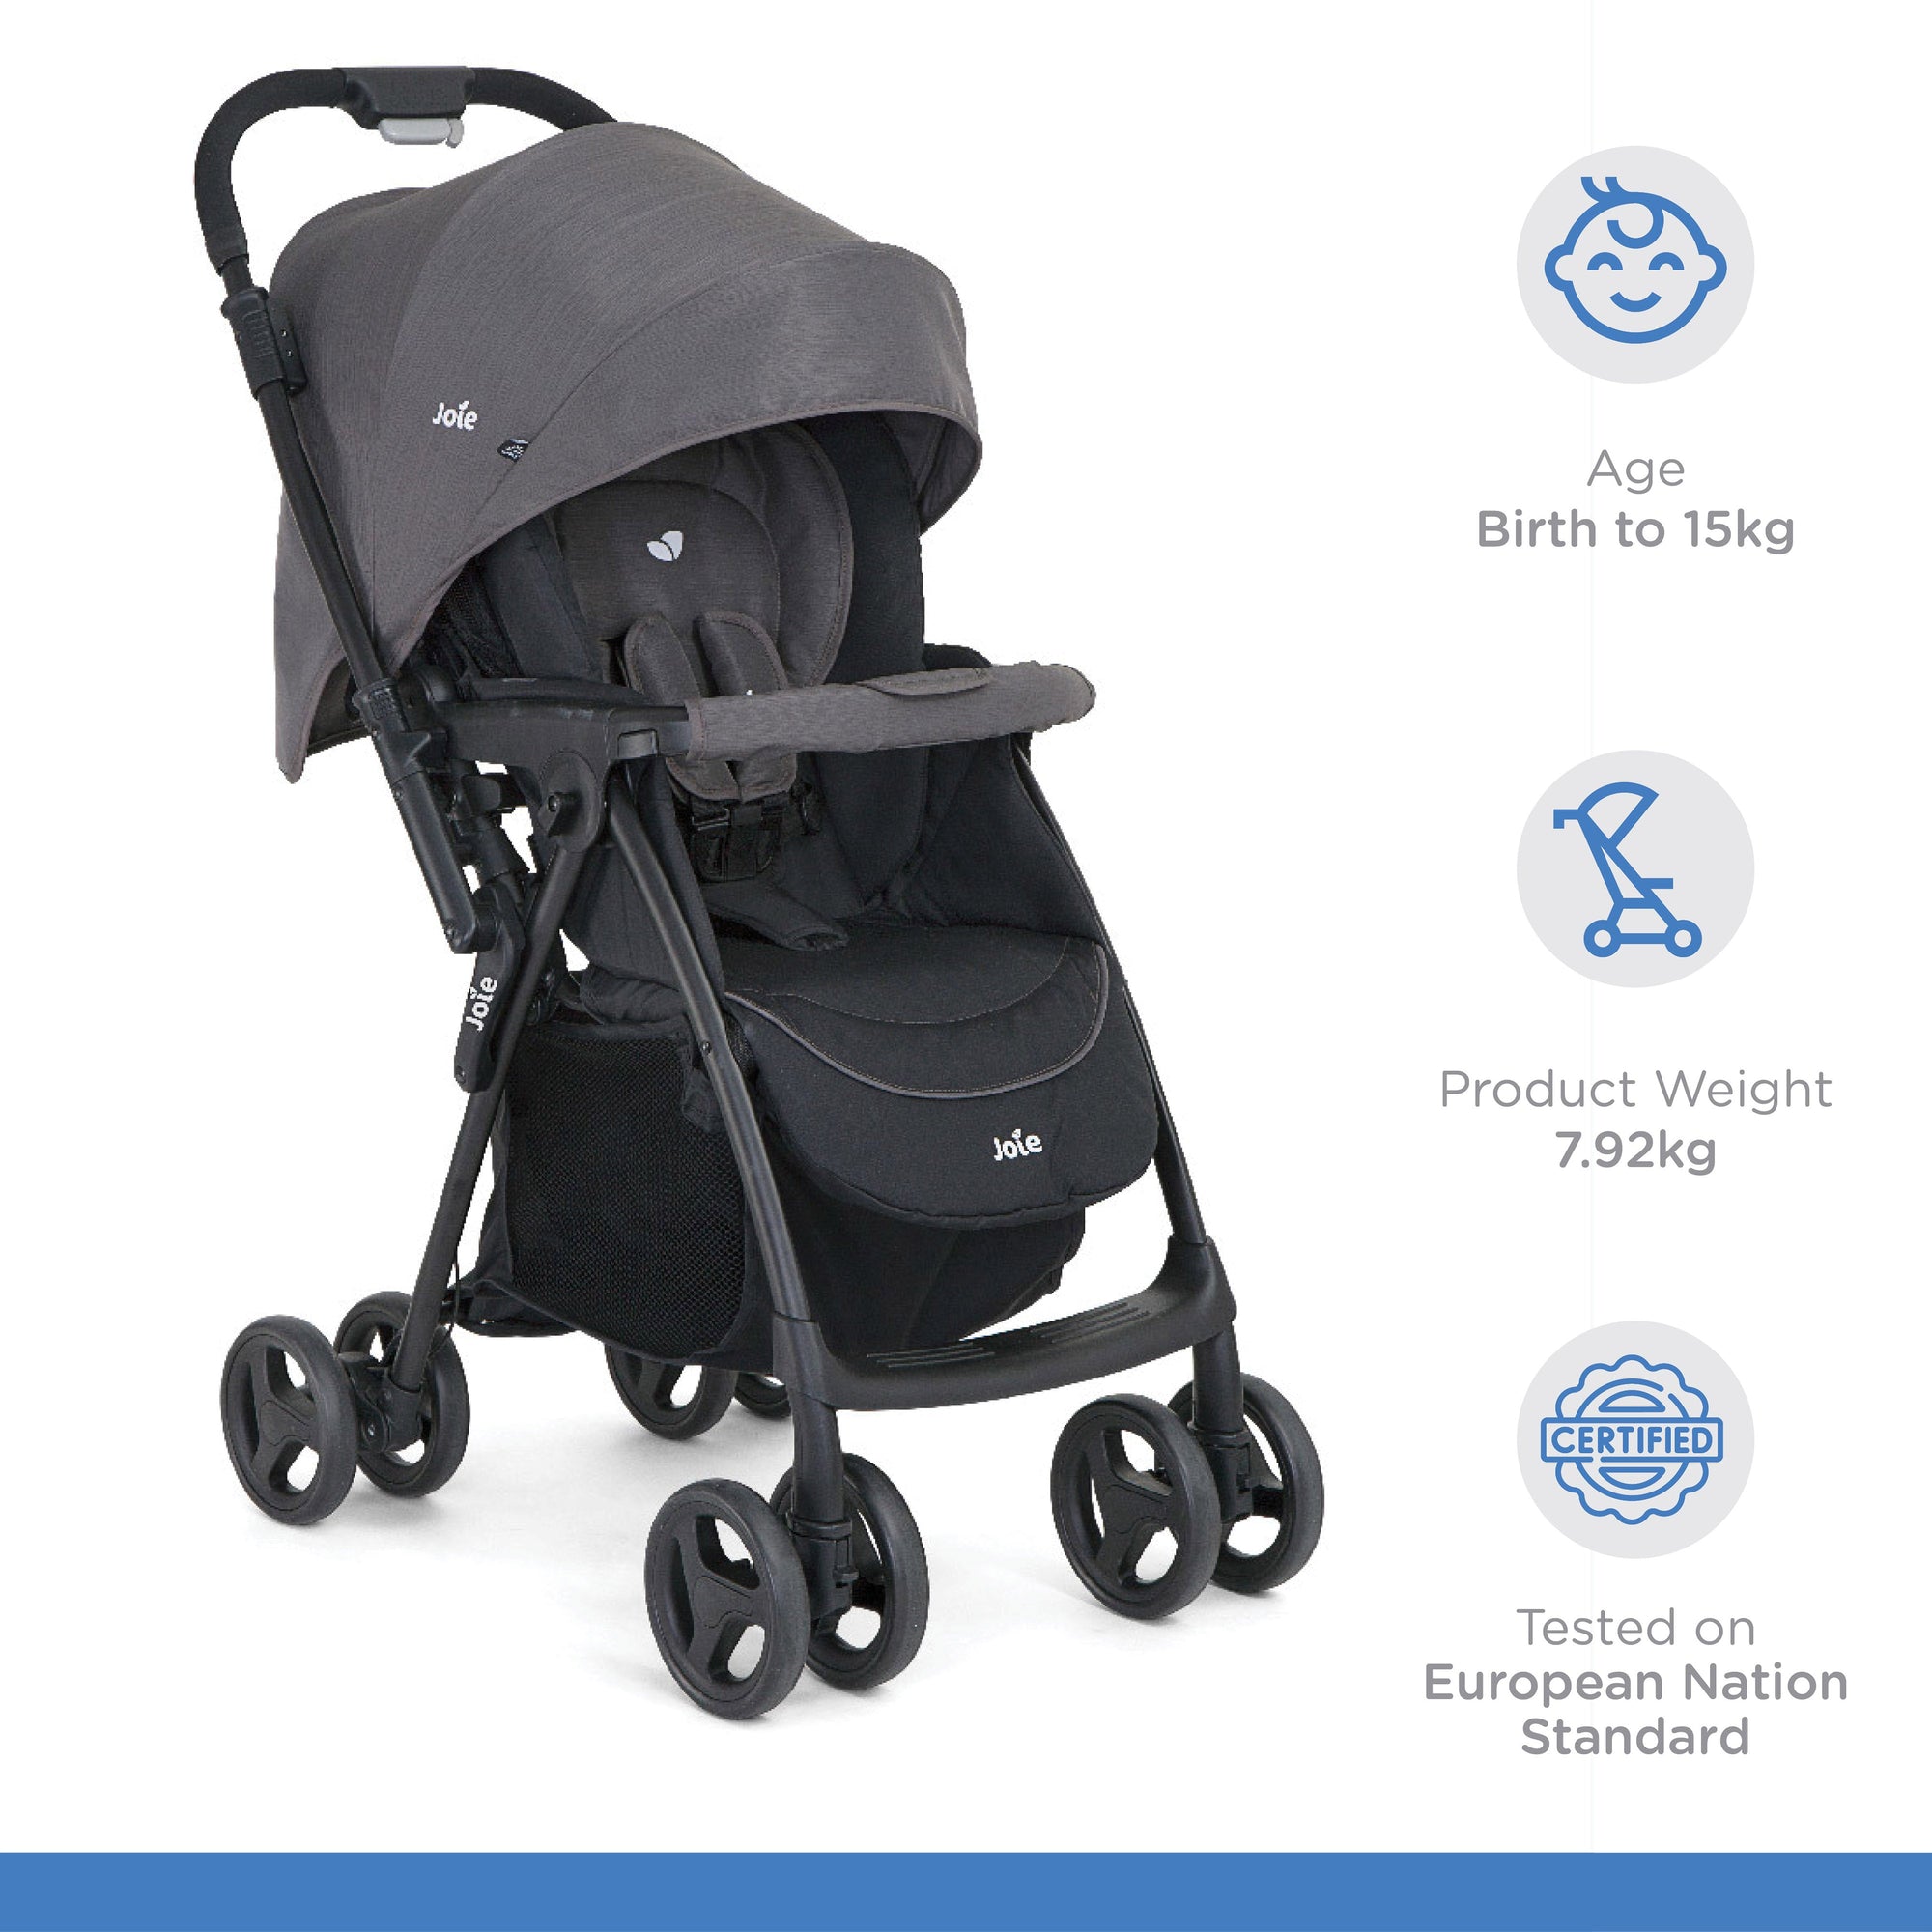 Joie Mirus Reversible Handle Stroller || Fashion-Ember || Birth+ to 36months - Toys4All.in